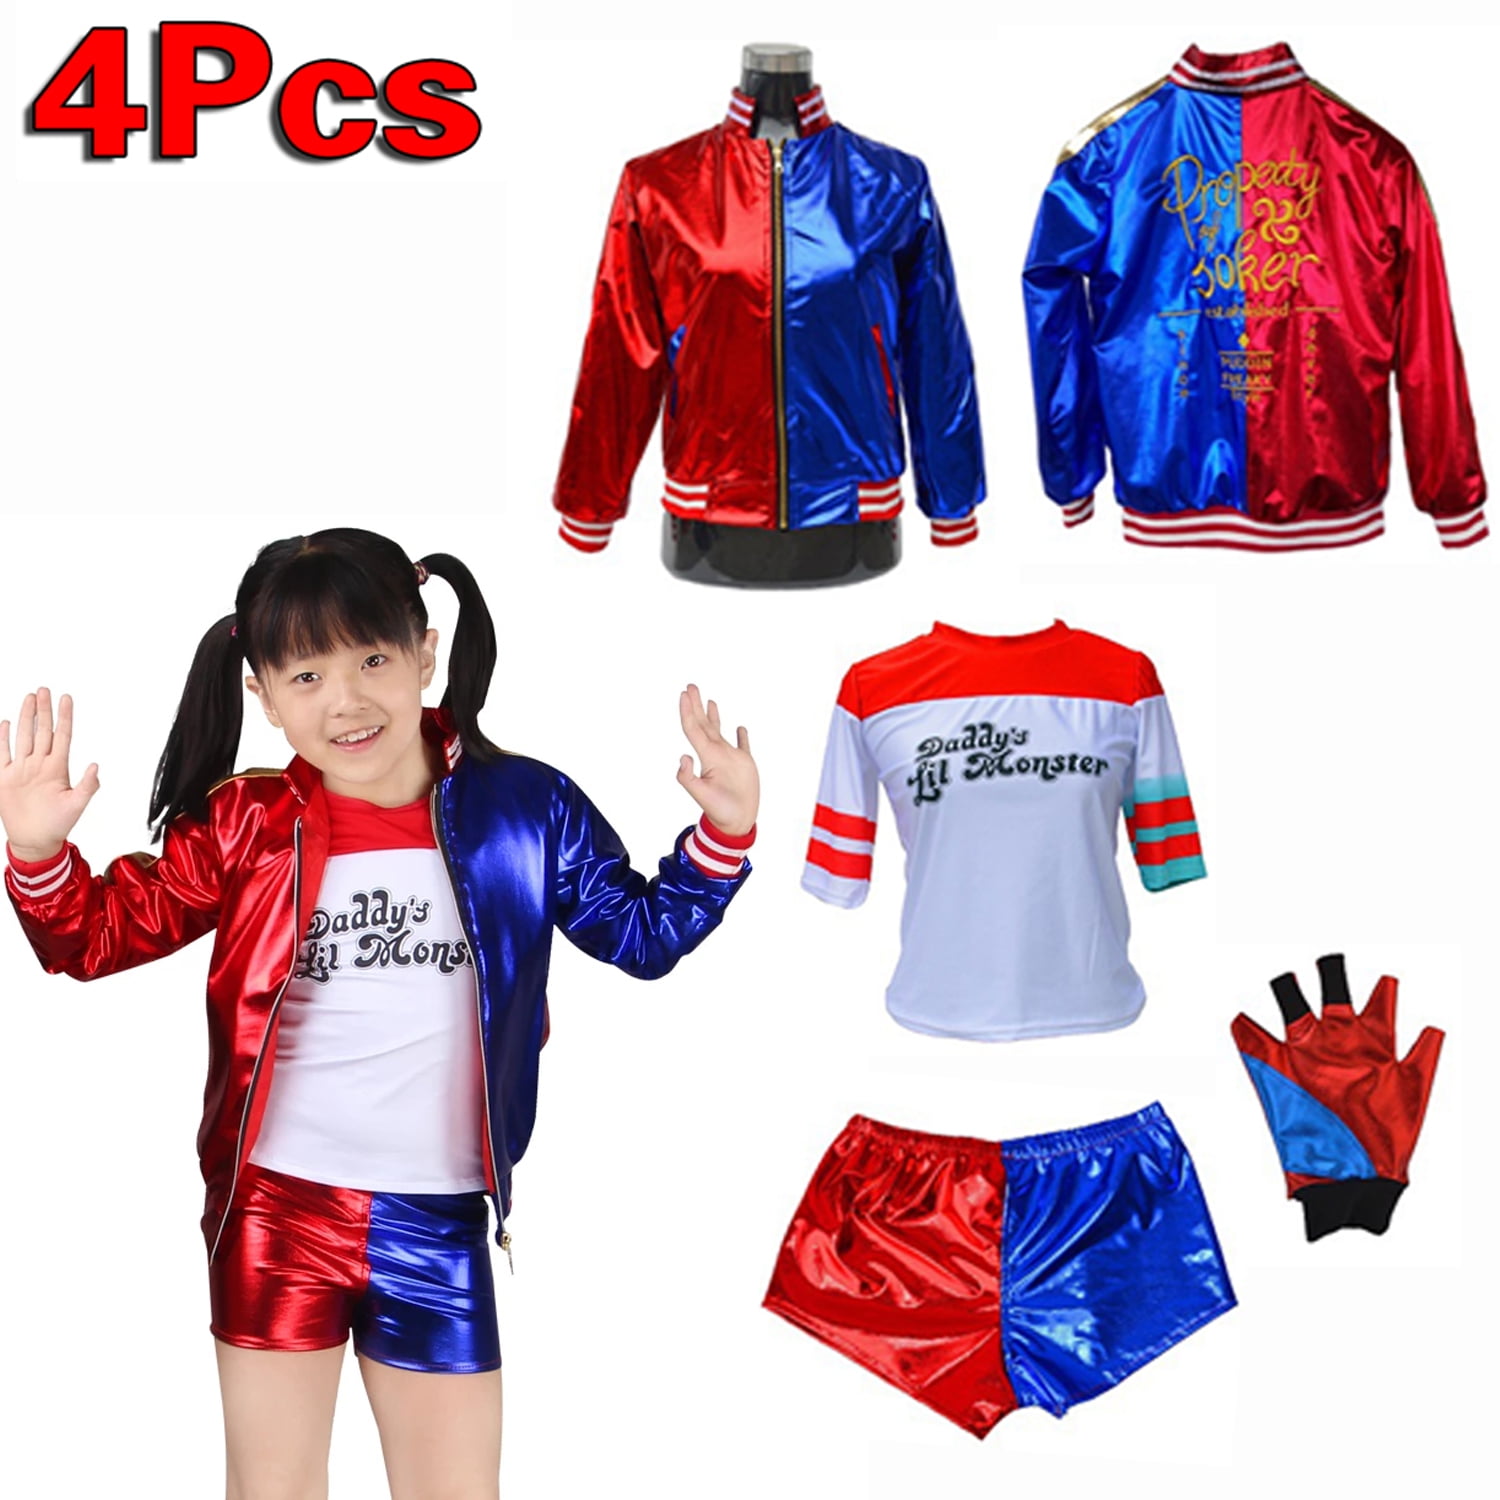 4PCS Kids Girl's Adult Harley Quinn Suicide Squad Cosplay Costume with ...